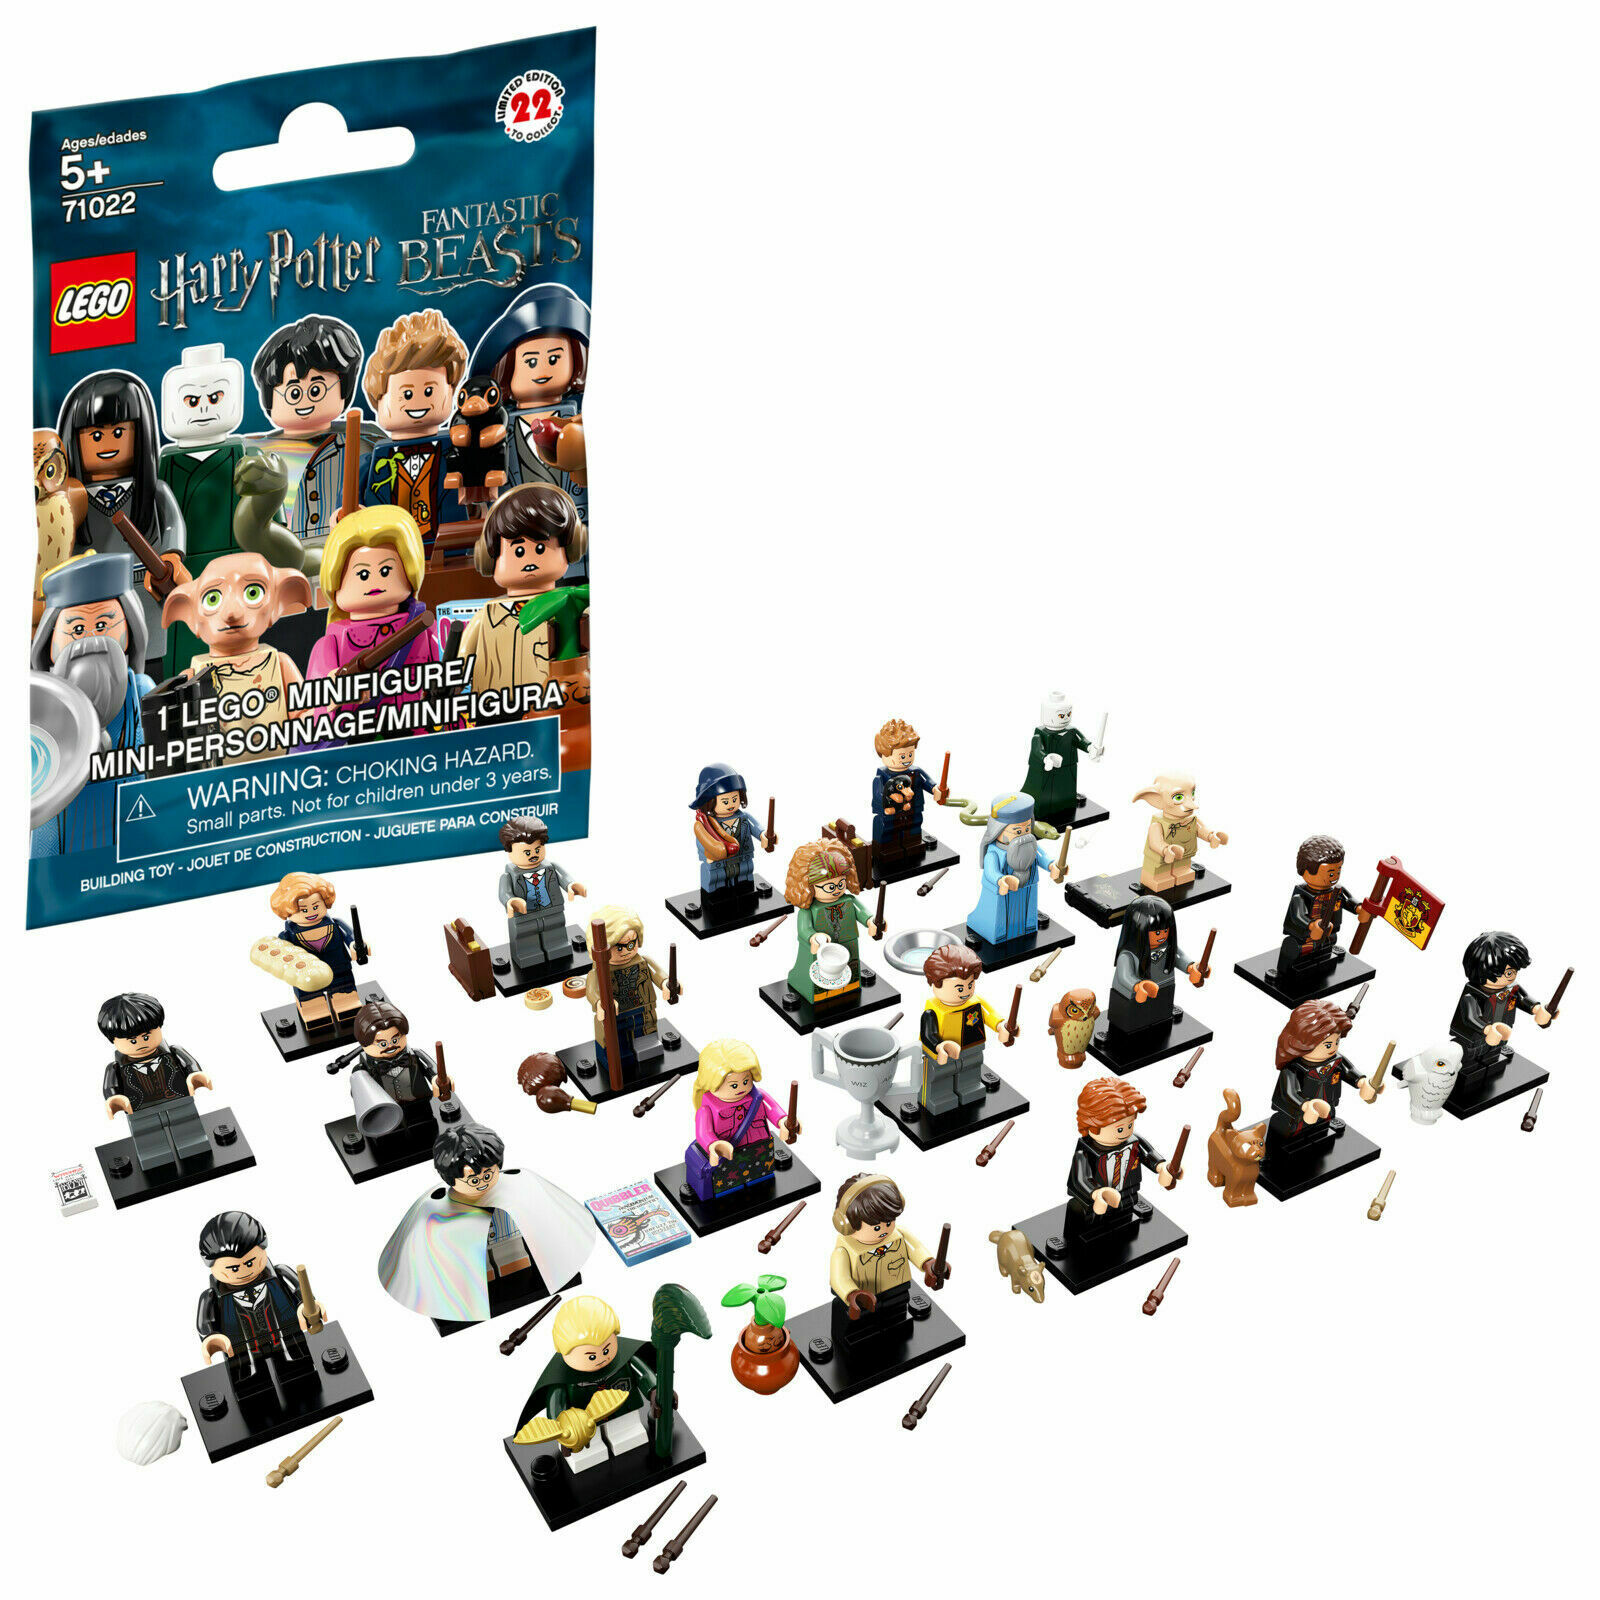 In Hand! Lego 71022 Minifigures Lego Harry Potter Fantastic Beasts Series 1